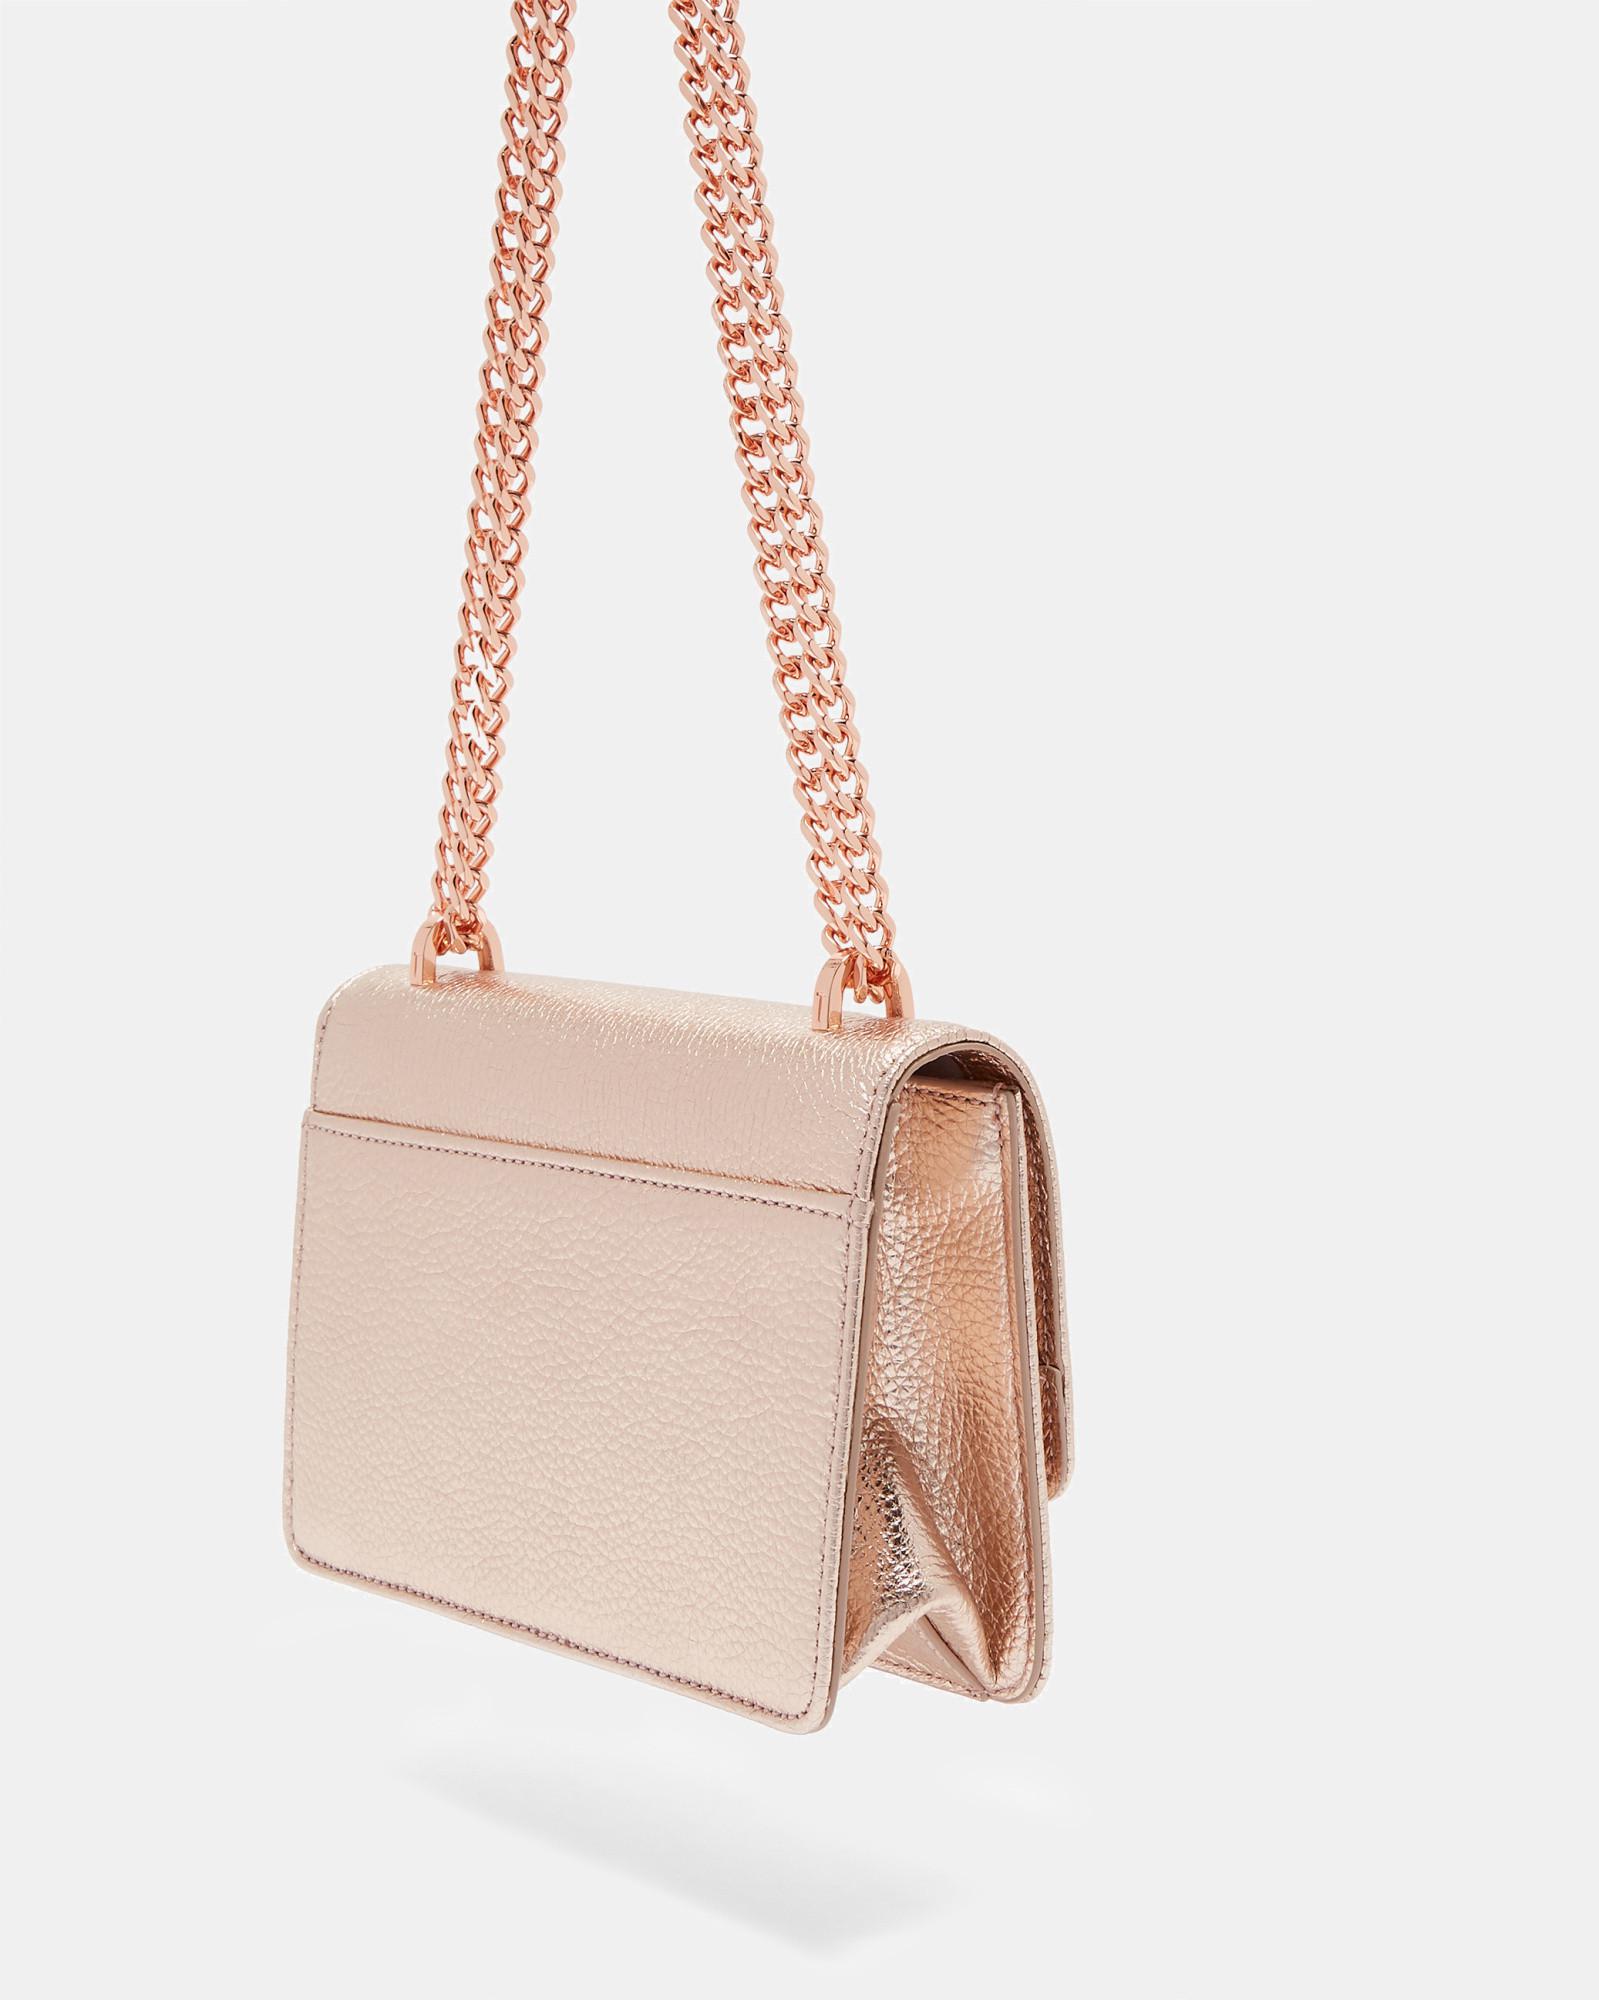 Ted Baker Bow Detail Metallic Leather Cross Body Bag in Rose Gold (Pink) -  Lyst